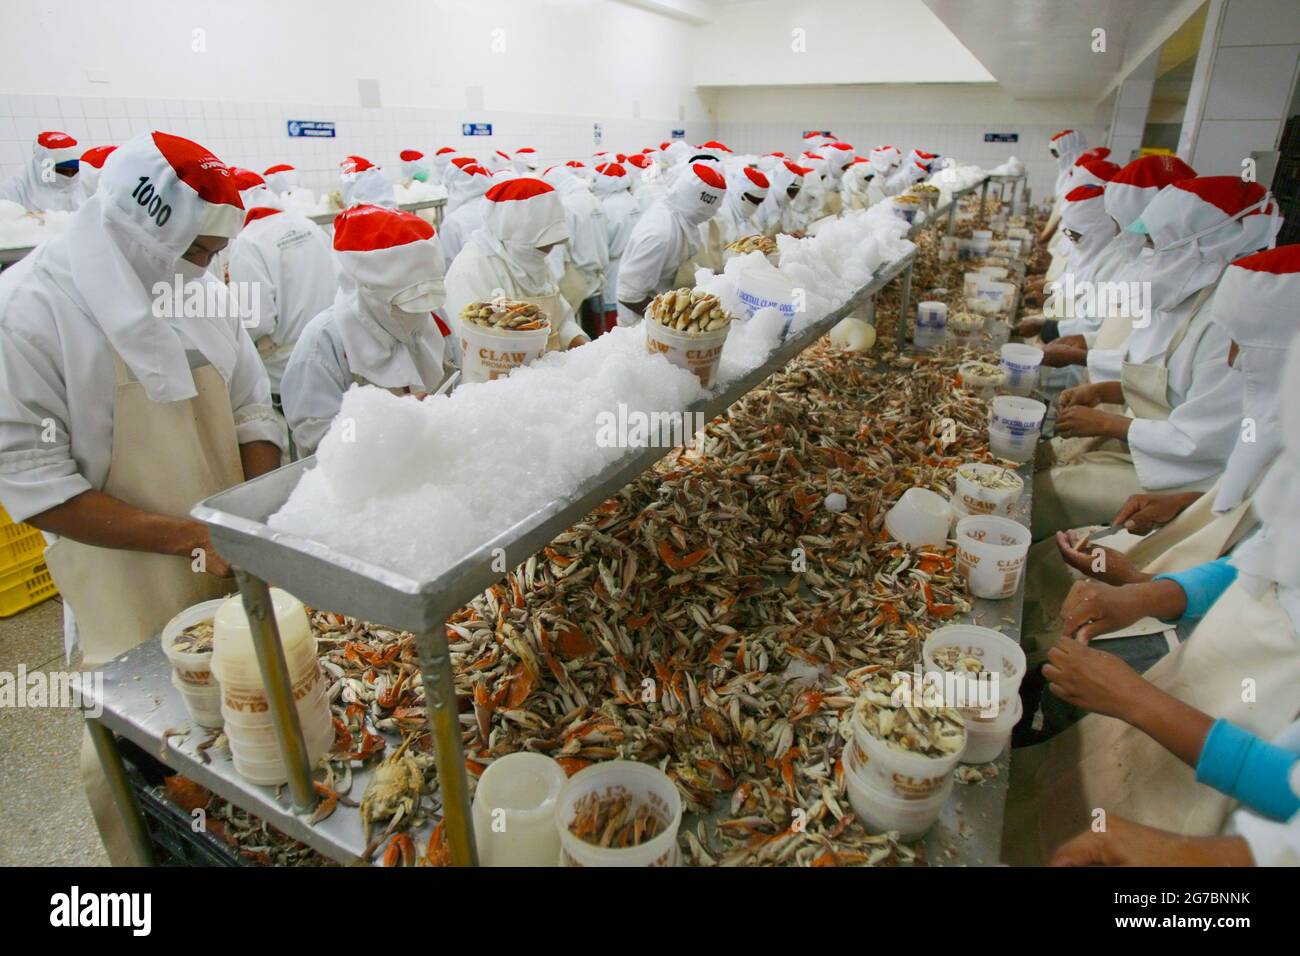 Maracaibo-Venezuela-21-07-2011- Worker at a blue crab processing plant prepare the species to be packeged and exported to the United States. © JOSE IS Stock Photo